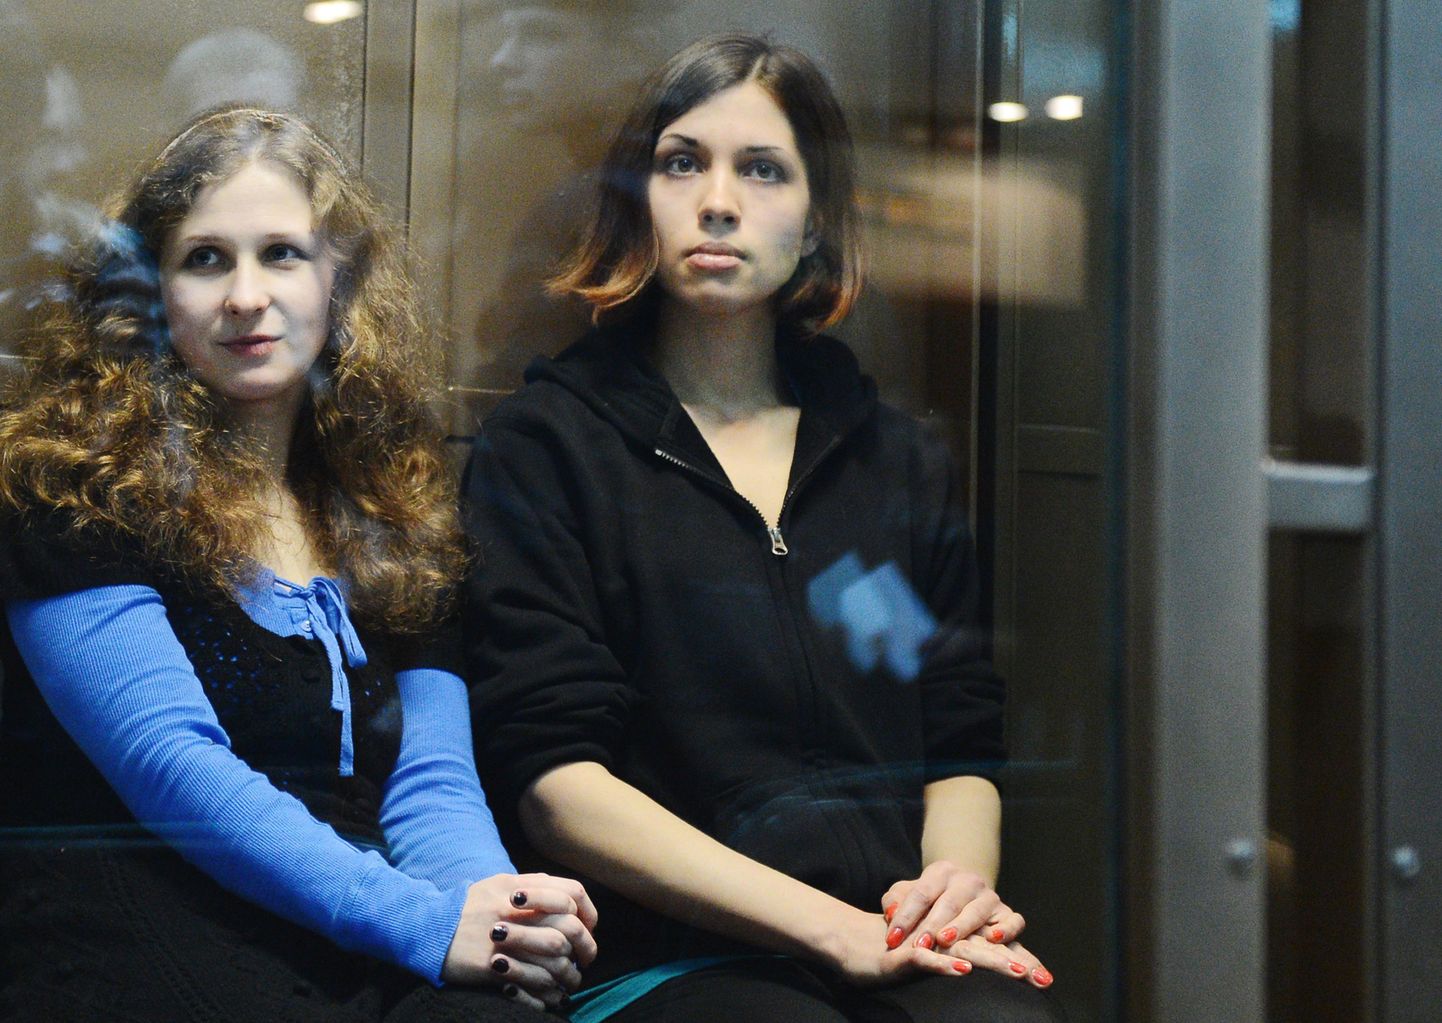 (FILES) A file picture taken on October 10, 2012, shows two jailed members of the all-girl punk band "Pussy Riot," (L-R) Maria Alyokhina and Nadezhda Tolokonnikova, sitting in a glass-walled cage in a court in Moscow. Maria Alyokhina, one of the jailed members of Russian punk band Pussy Riot, was freed from prison on December 23, 2013 after receiving amnesty, her lawyer and prison officials said. "Today around 9 a.m. (0500 GMT) she walked out to freedom," said the spokeswoman of the prison service in Nizhny Novgorod Yelena Nikishova.
. AFP PHOTO / NATALIA KOLESNIKOVA